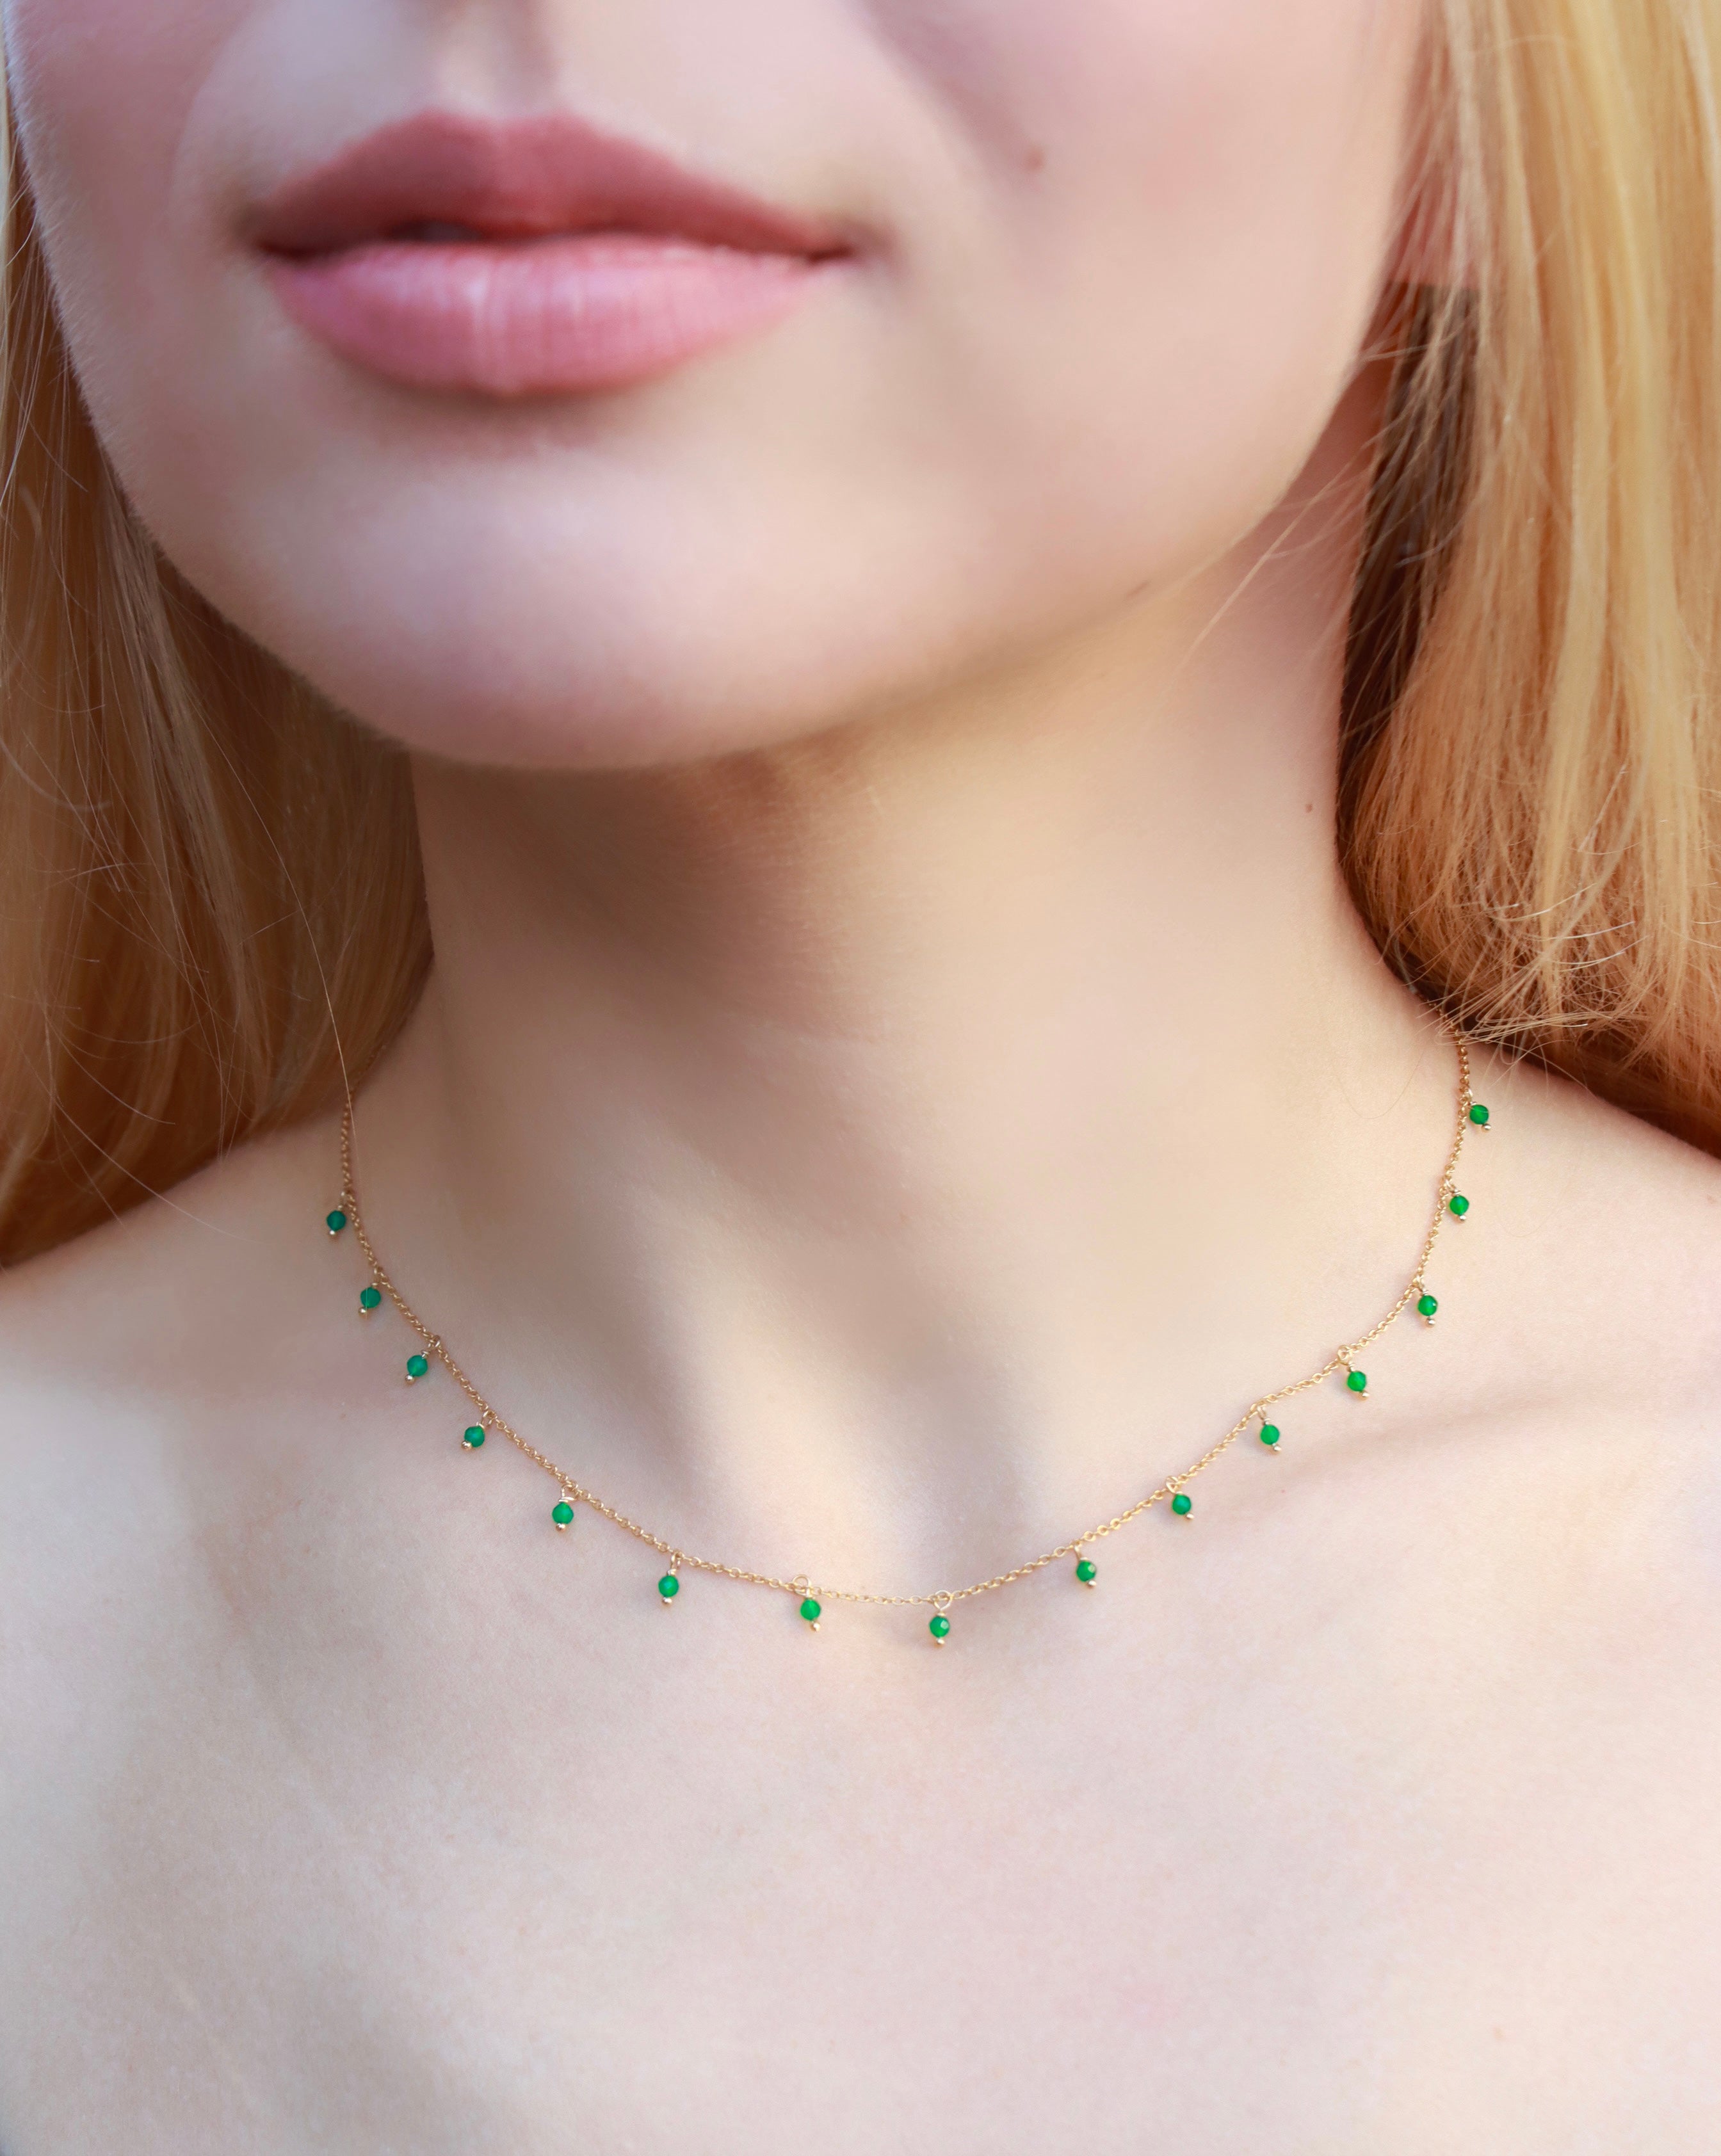 Dangling green onyx necklace